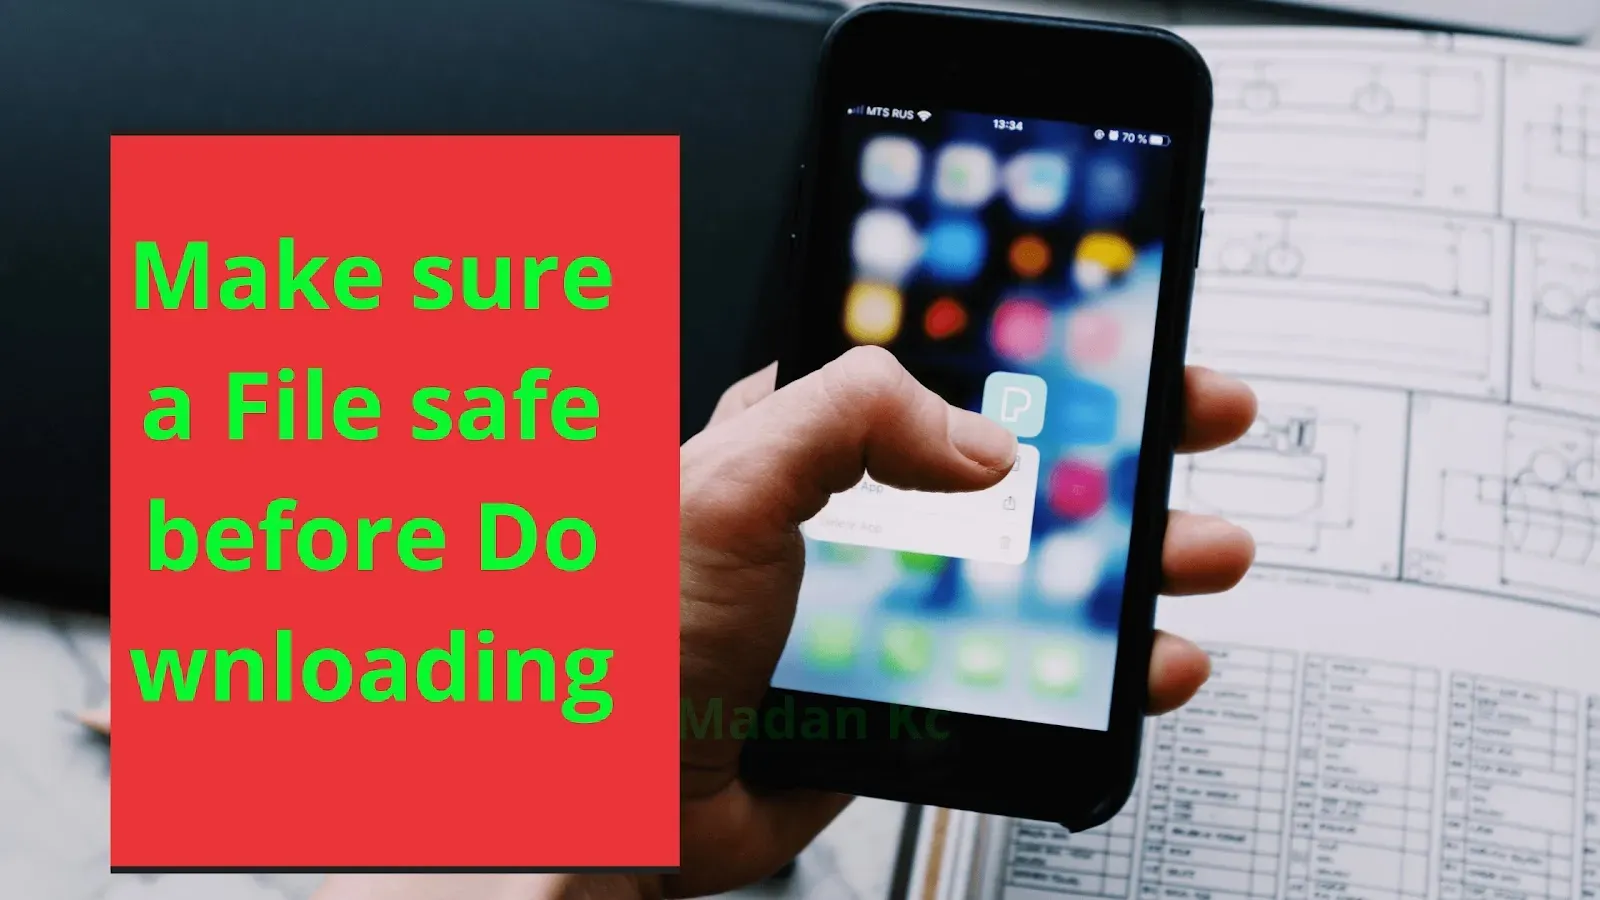 How to Make sure a File safe before Downloading